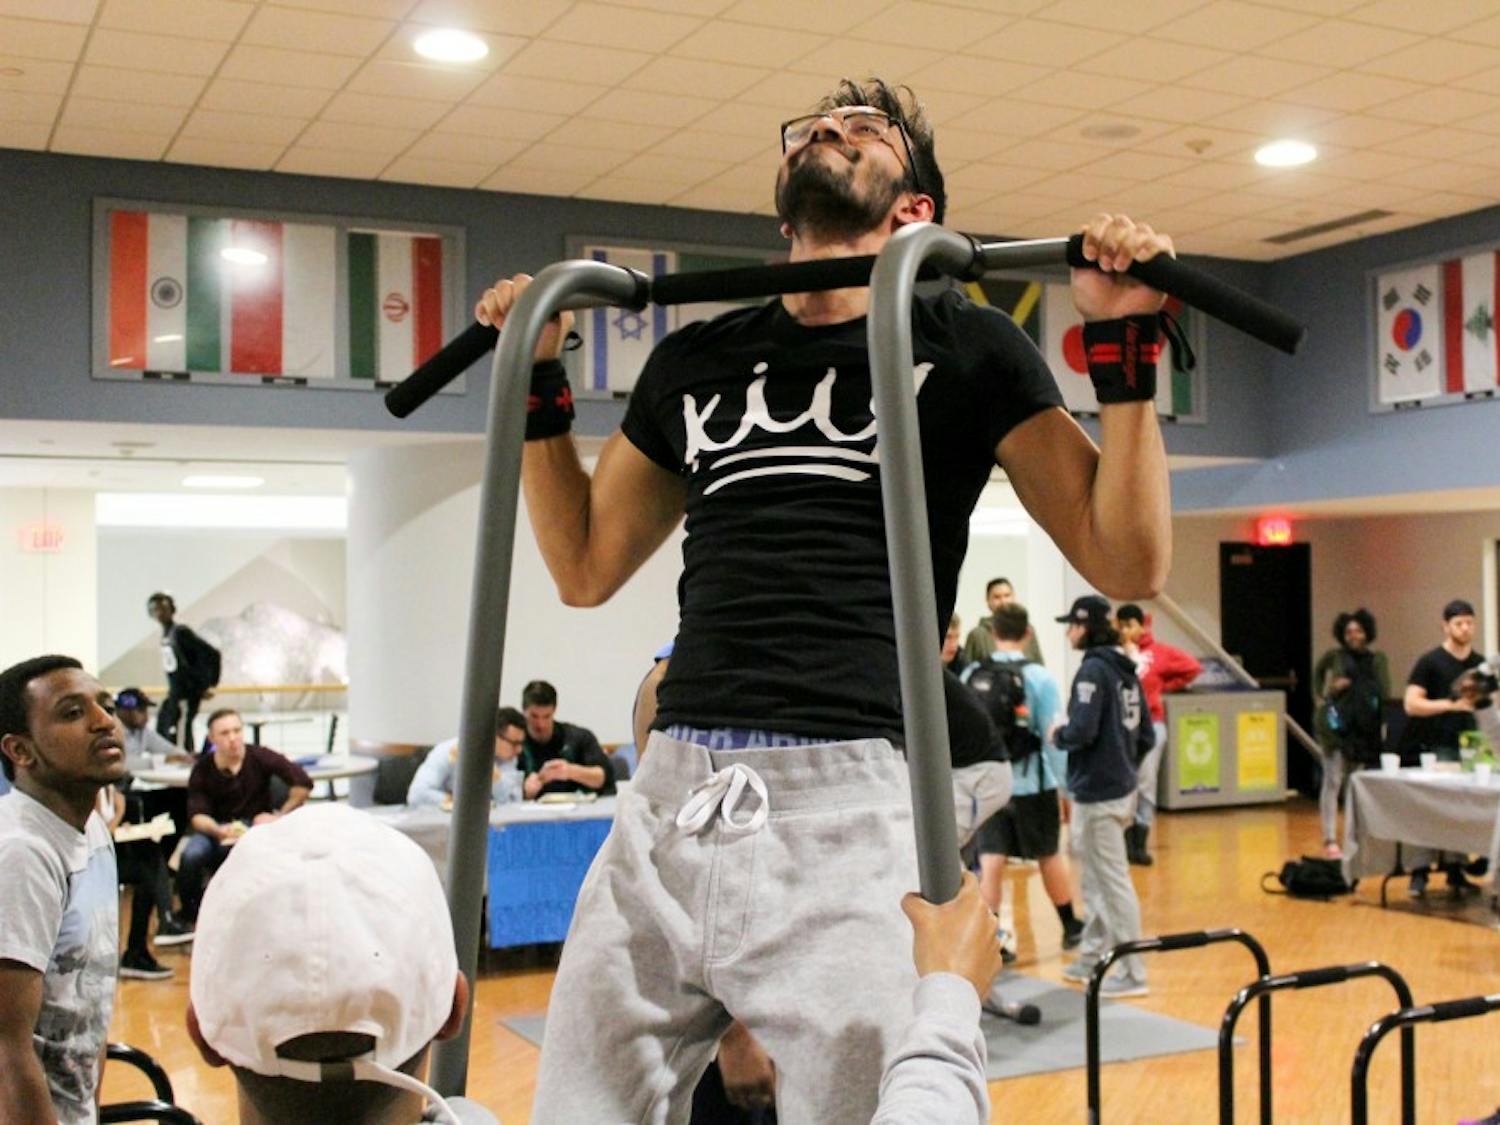 Competitions were held throughout the event, including a pull-up contest, a push-up contest and a sit-up contest. Winners of the competition were given fitness prizes.&nbsp;